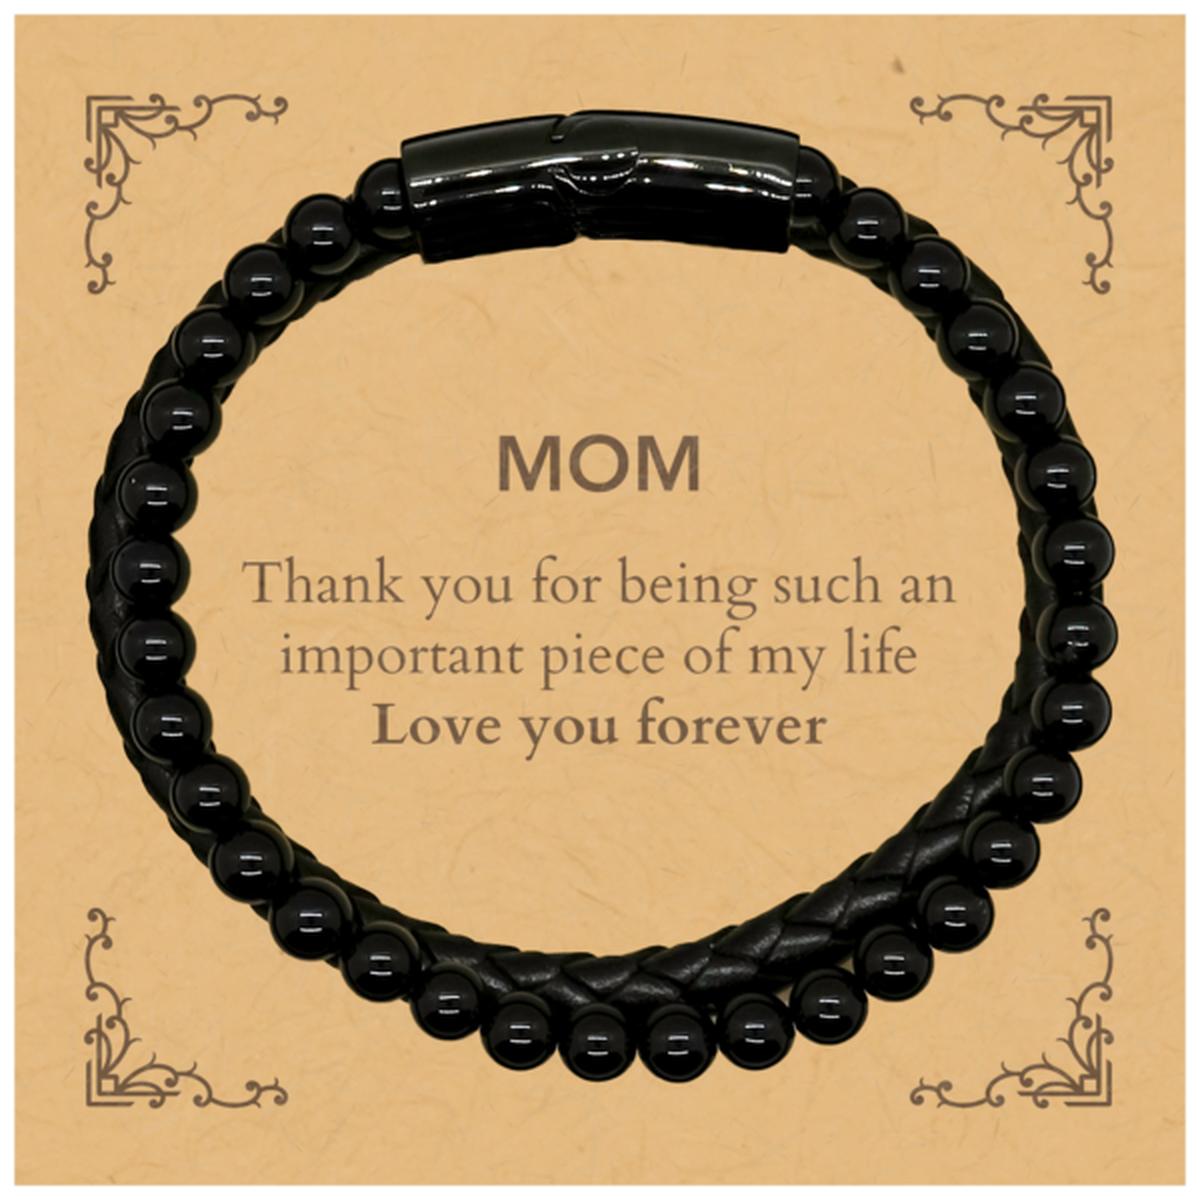 Appropriate Mom Stone Leather Bracelets Epic Birthday Gifts for Mom Thank you for being such an important piece of my life Mom Christmas Mothers Fathers Day